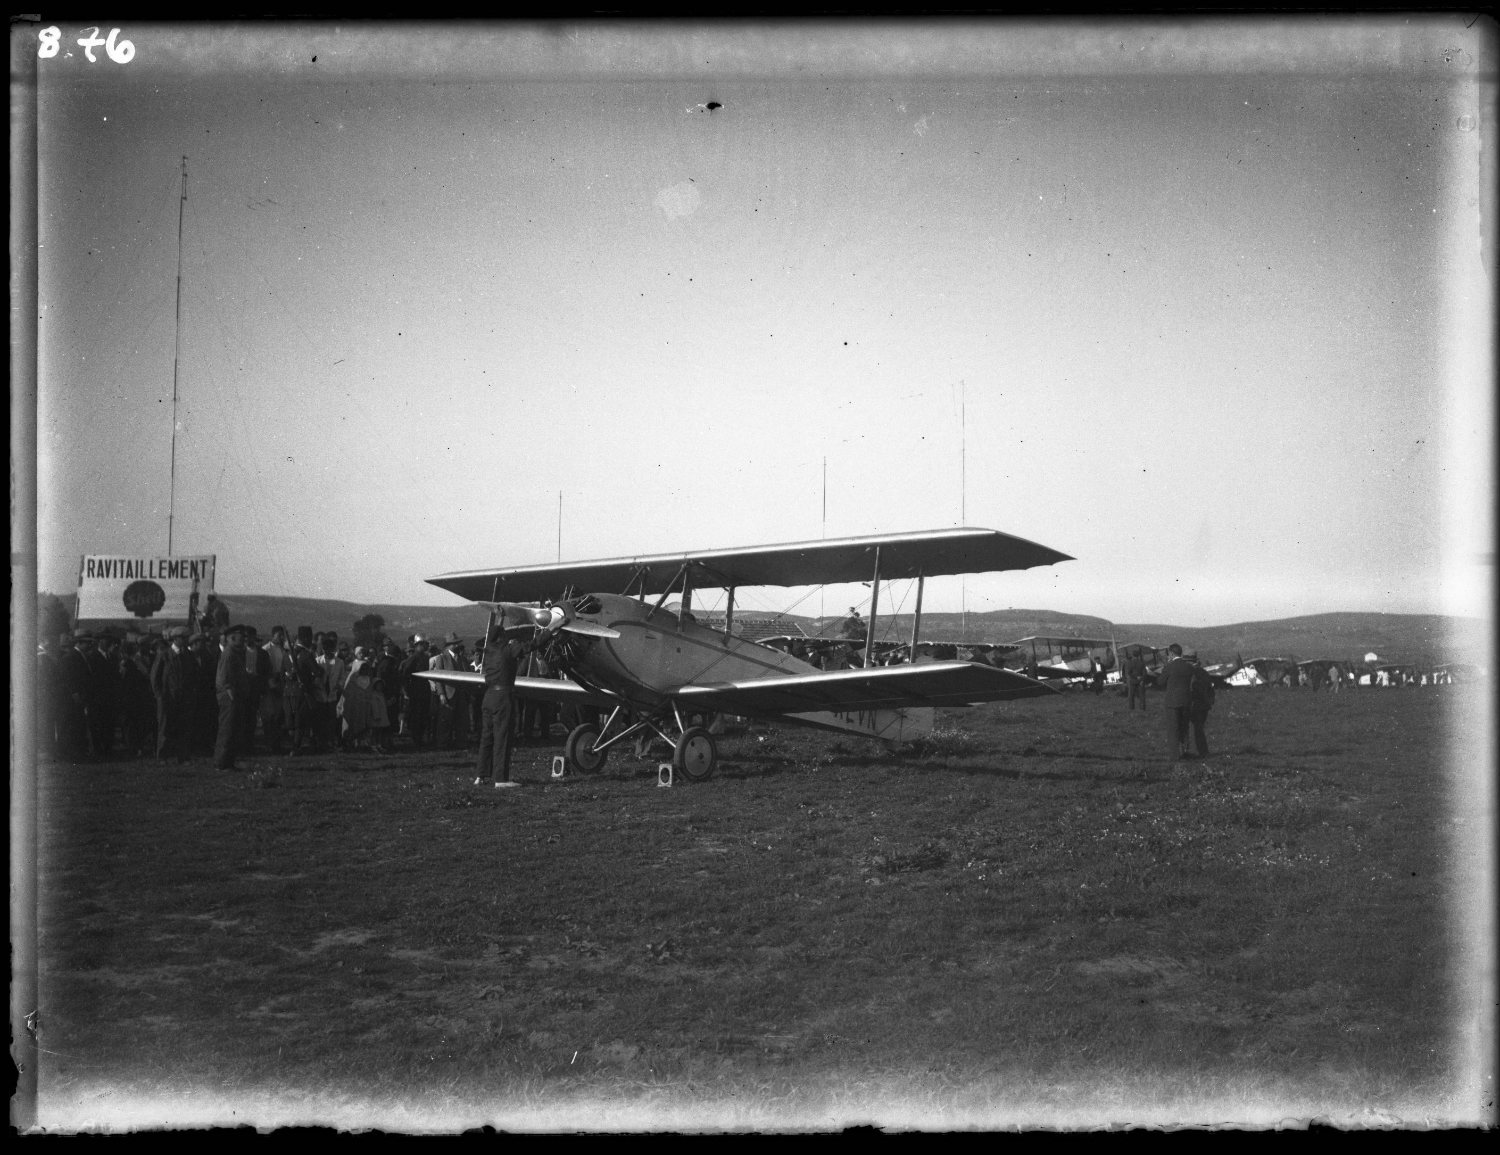 Side view, plane preparing for take off at airfield, crowd in European dress observing as a man services propeller